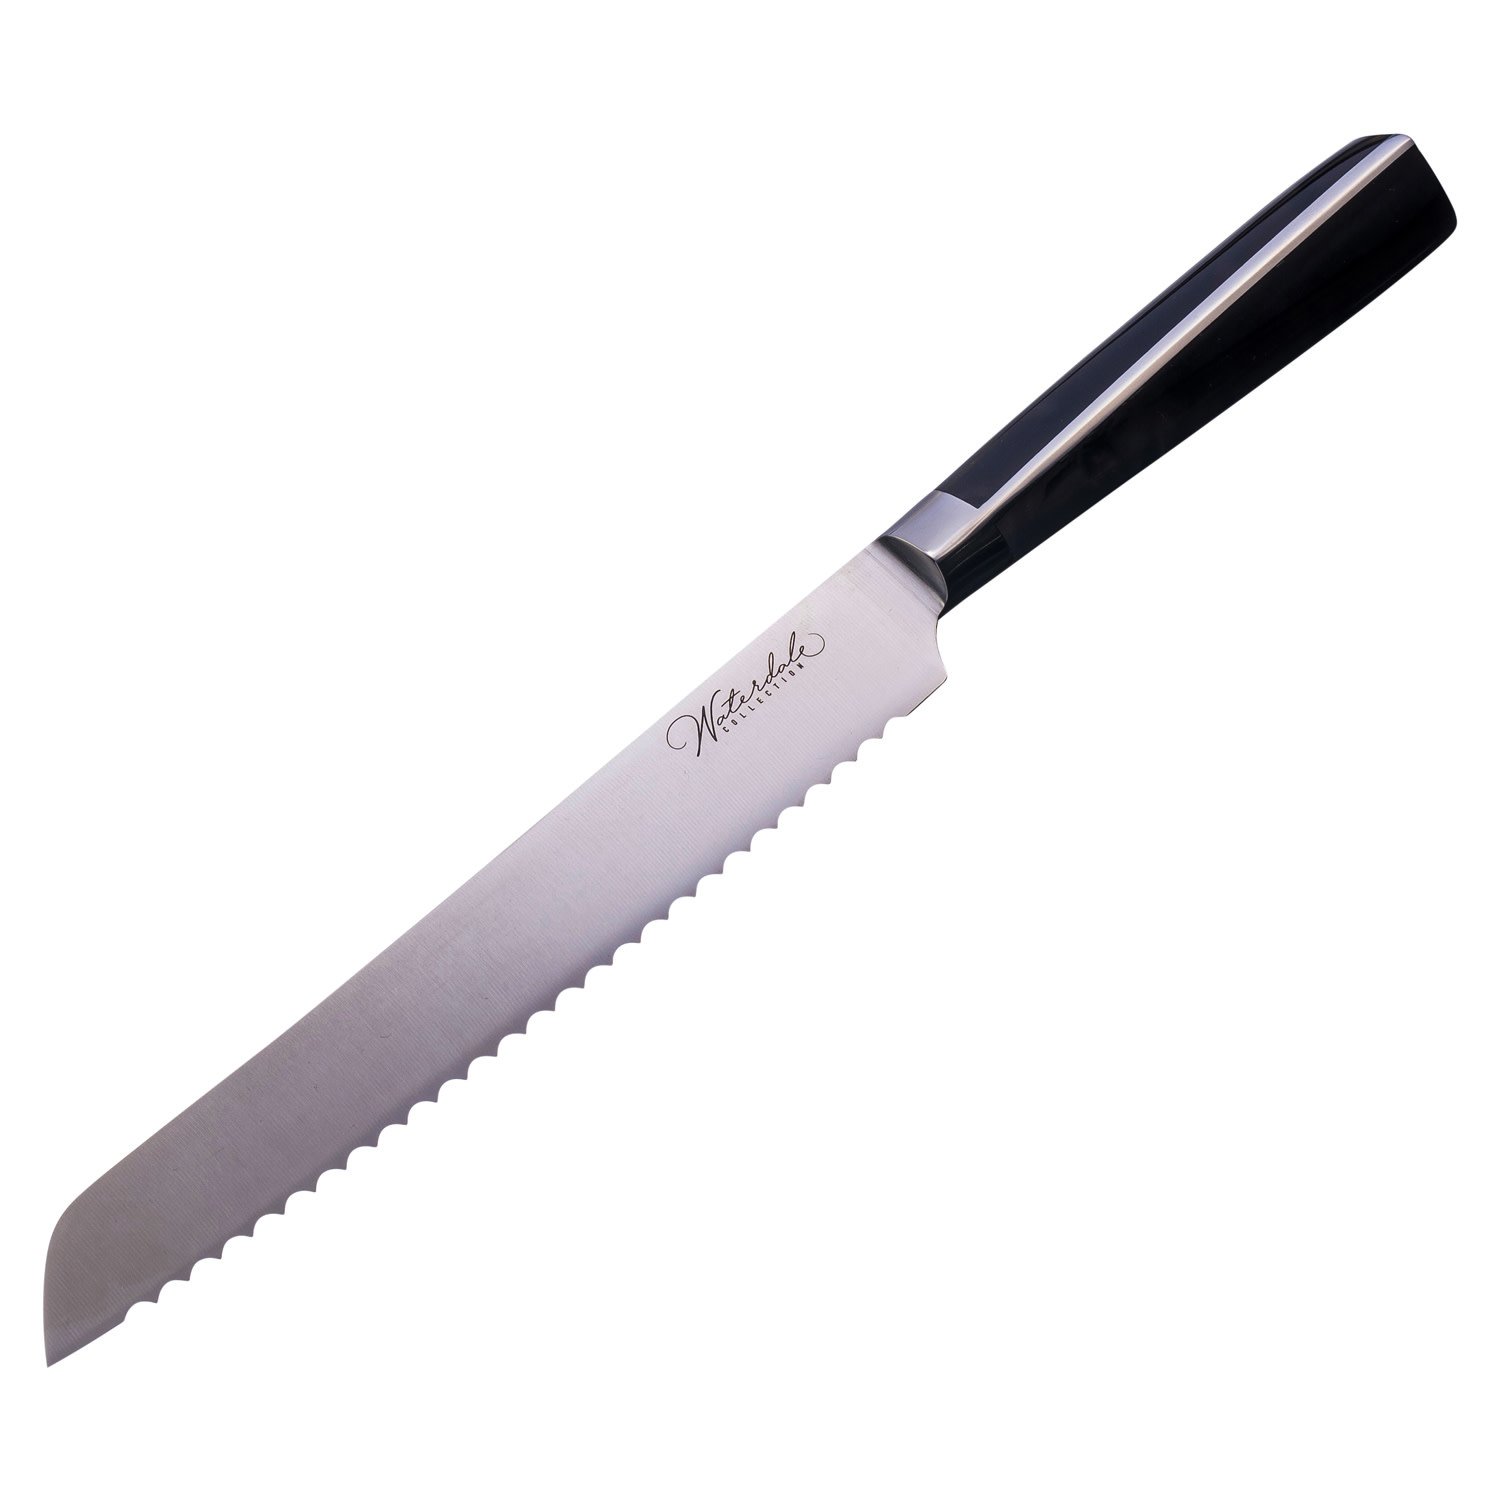 Waterdale Collection Metalucite Black Bread Knife